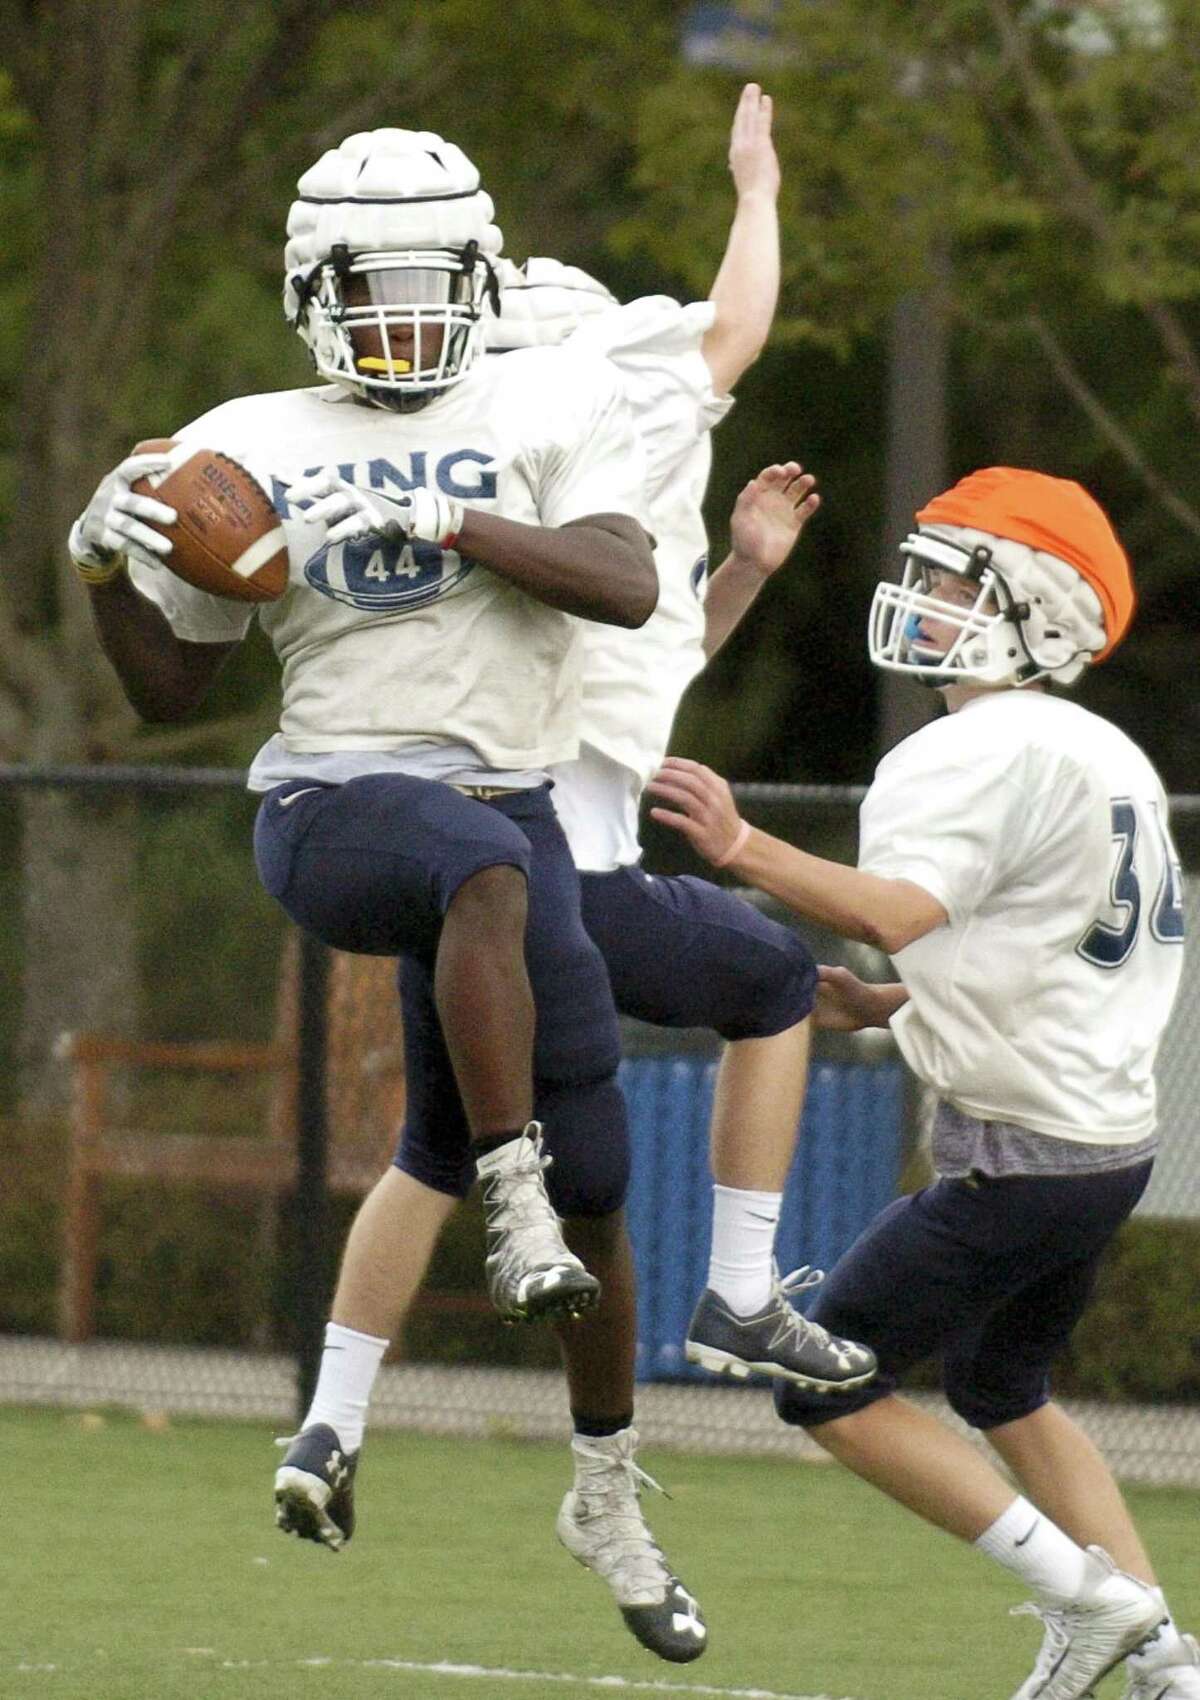 King outside linebacker Levaughn Lewis makes a reception during a practice at the school on Wednesday in Stamford.